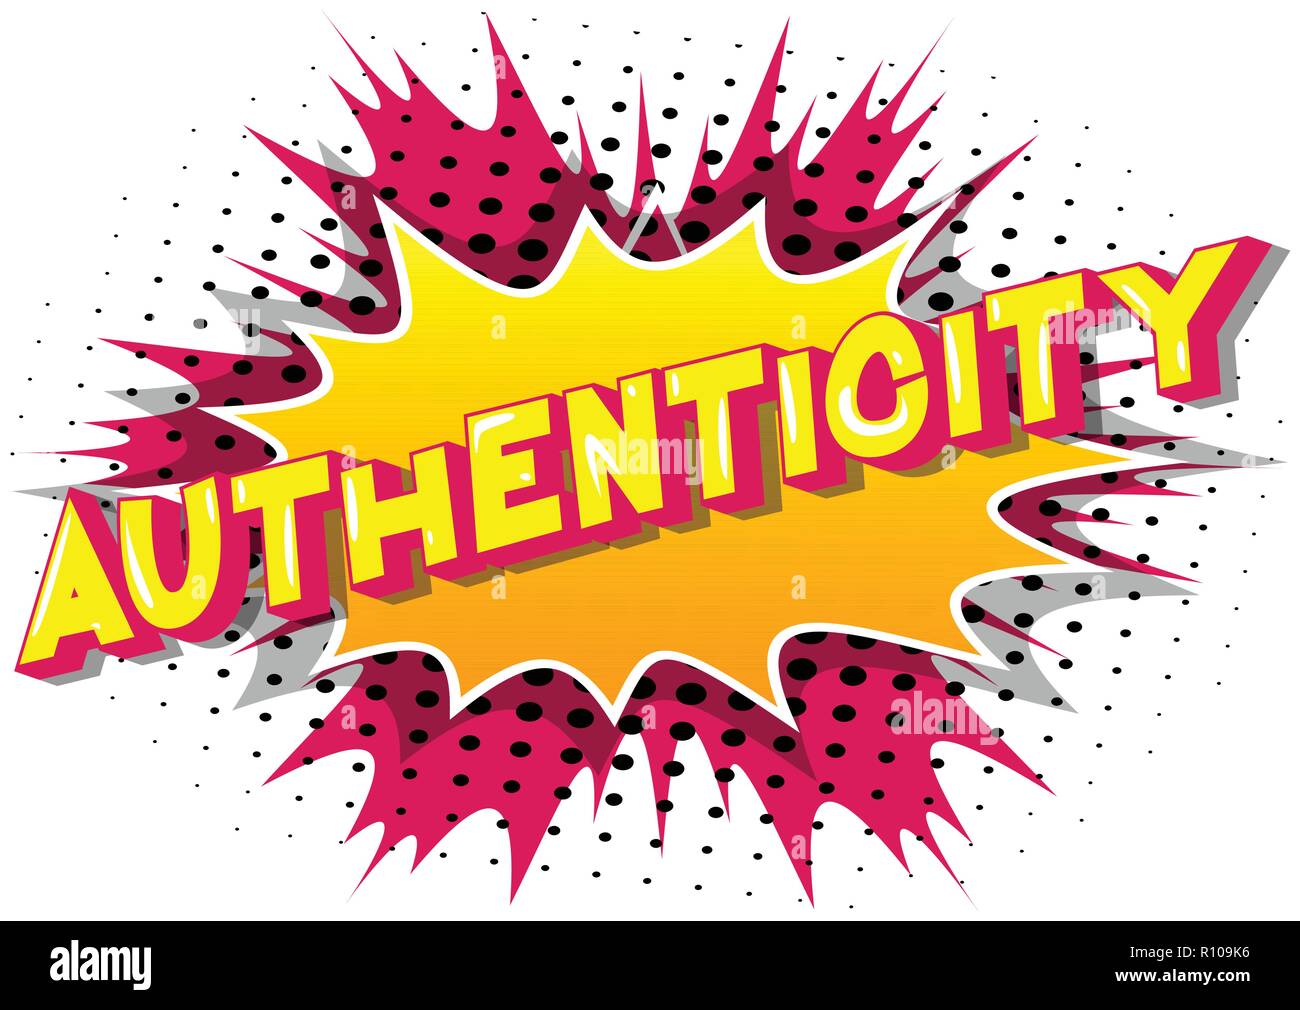 Authenticity - Vector illustrated comic book style phrase. Stock Vector